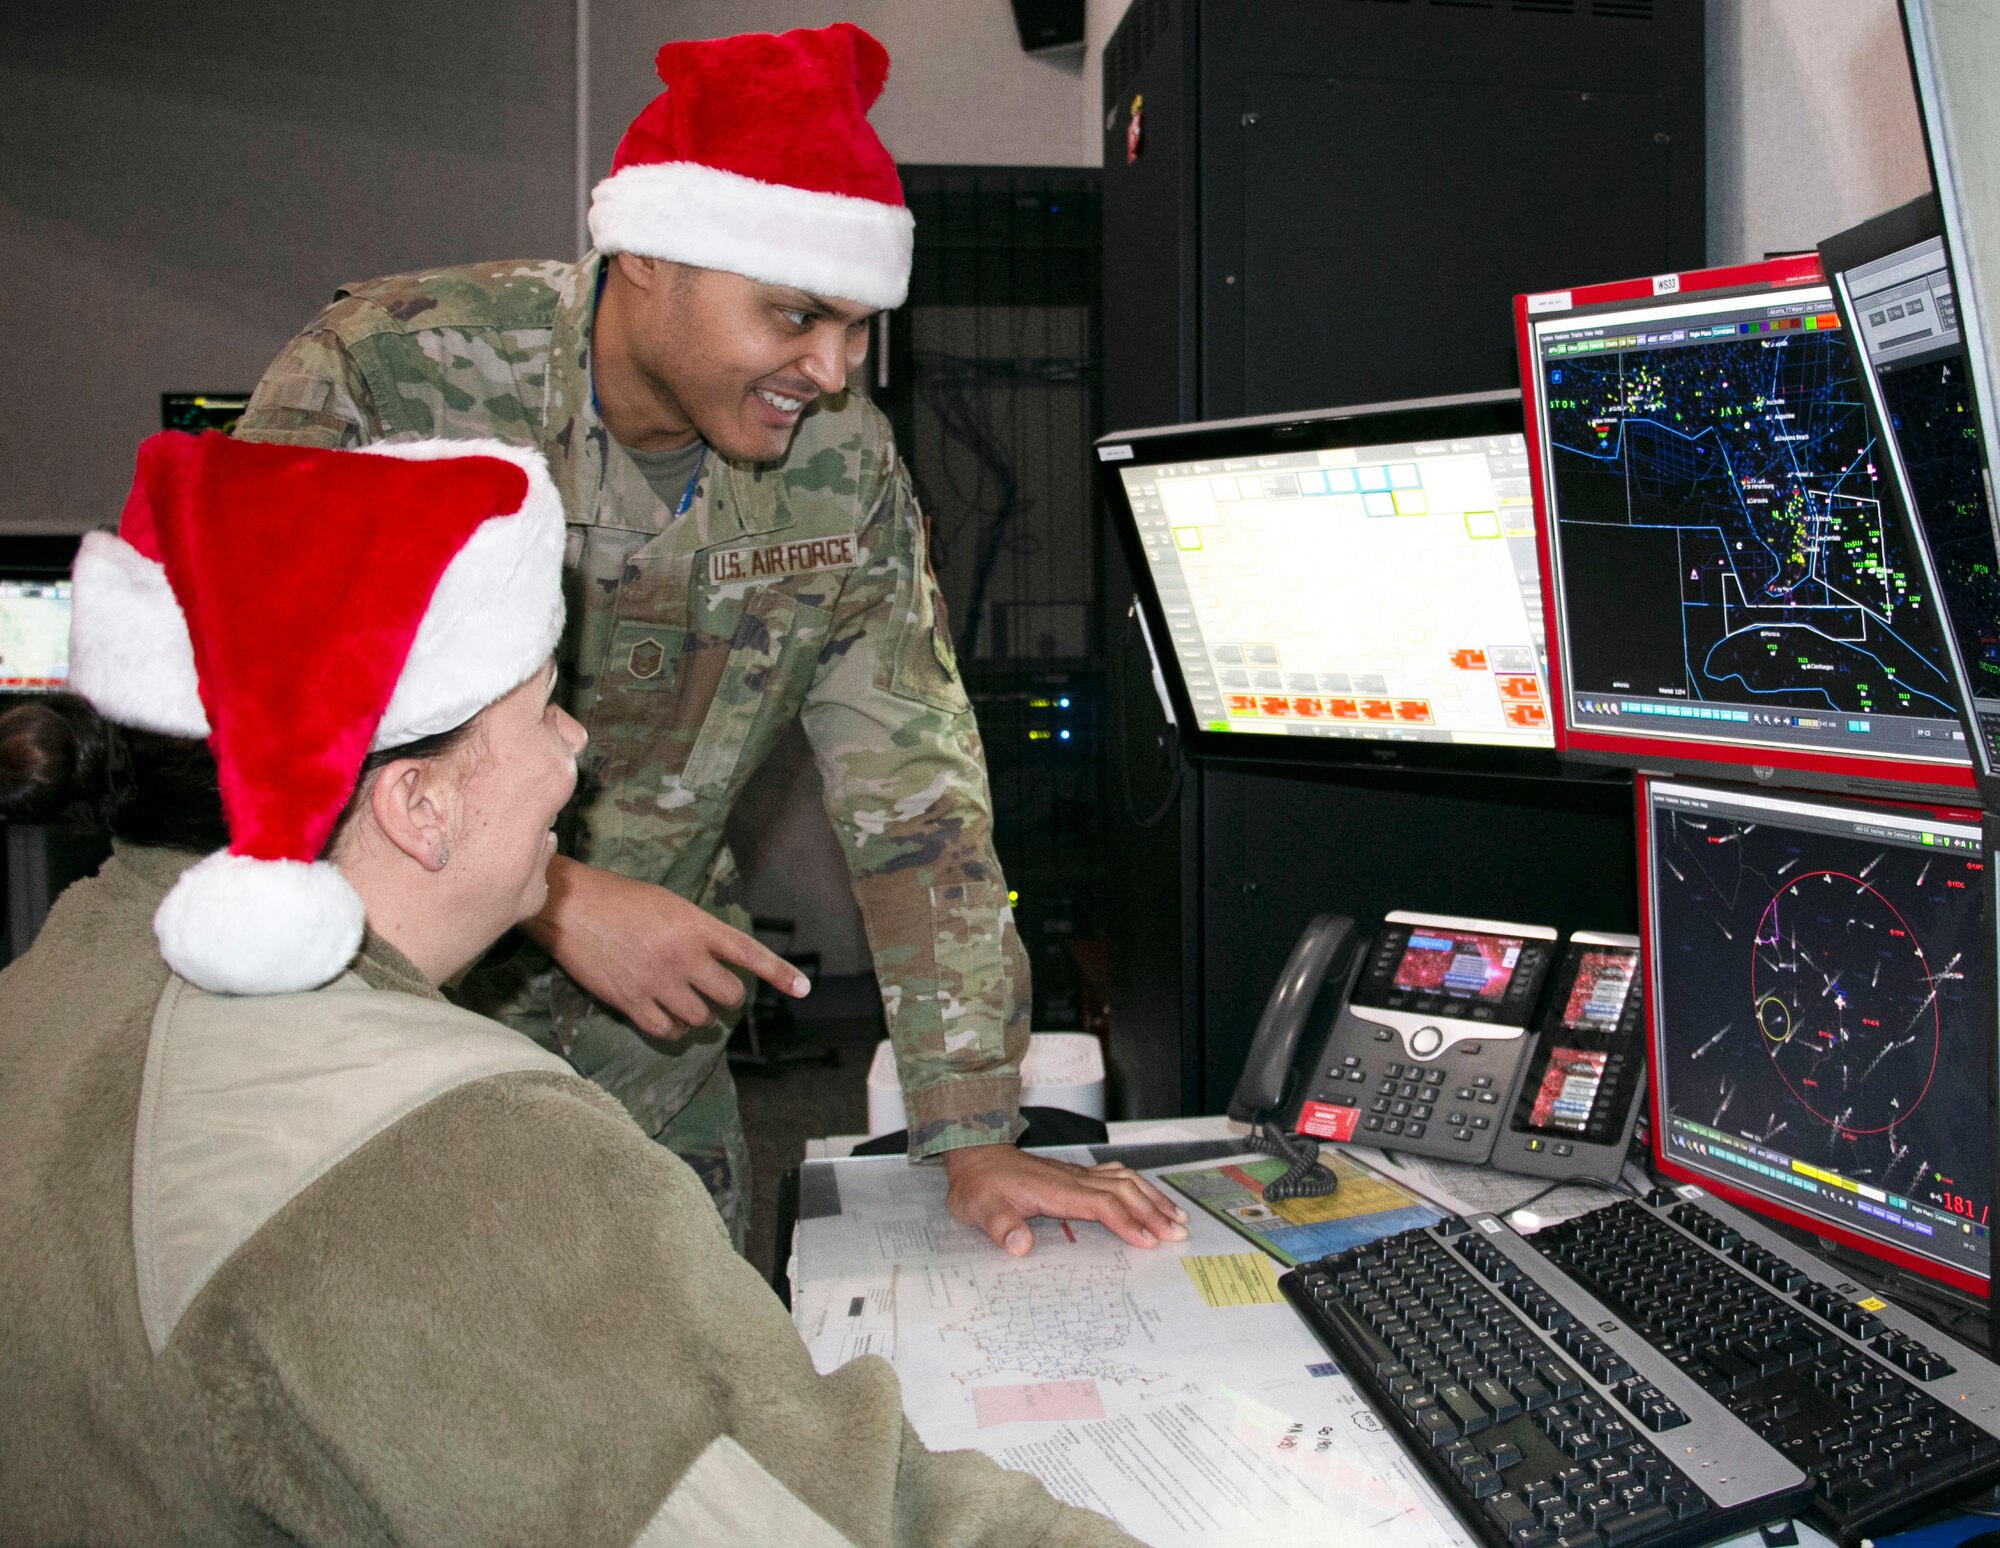 Air Force Master Sgt. Brian Burgess, standing, and Maj. Bonnie Bosworth of the New York Air National Guard’s 224th Air Defense Squadron train for Santa tracking operations on Dec. 16, 2022, at Eastern Air Defense Sector headquarters  in Rome, N.Y.